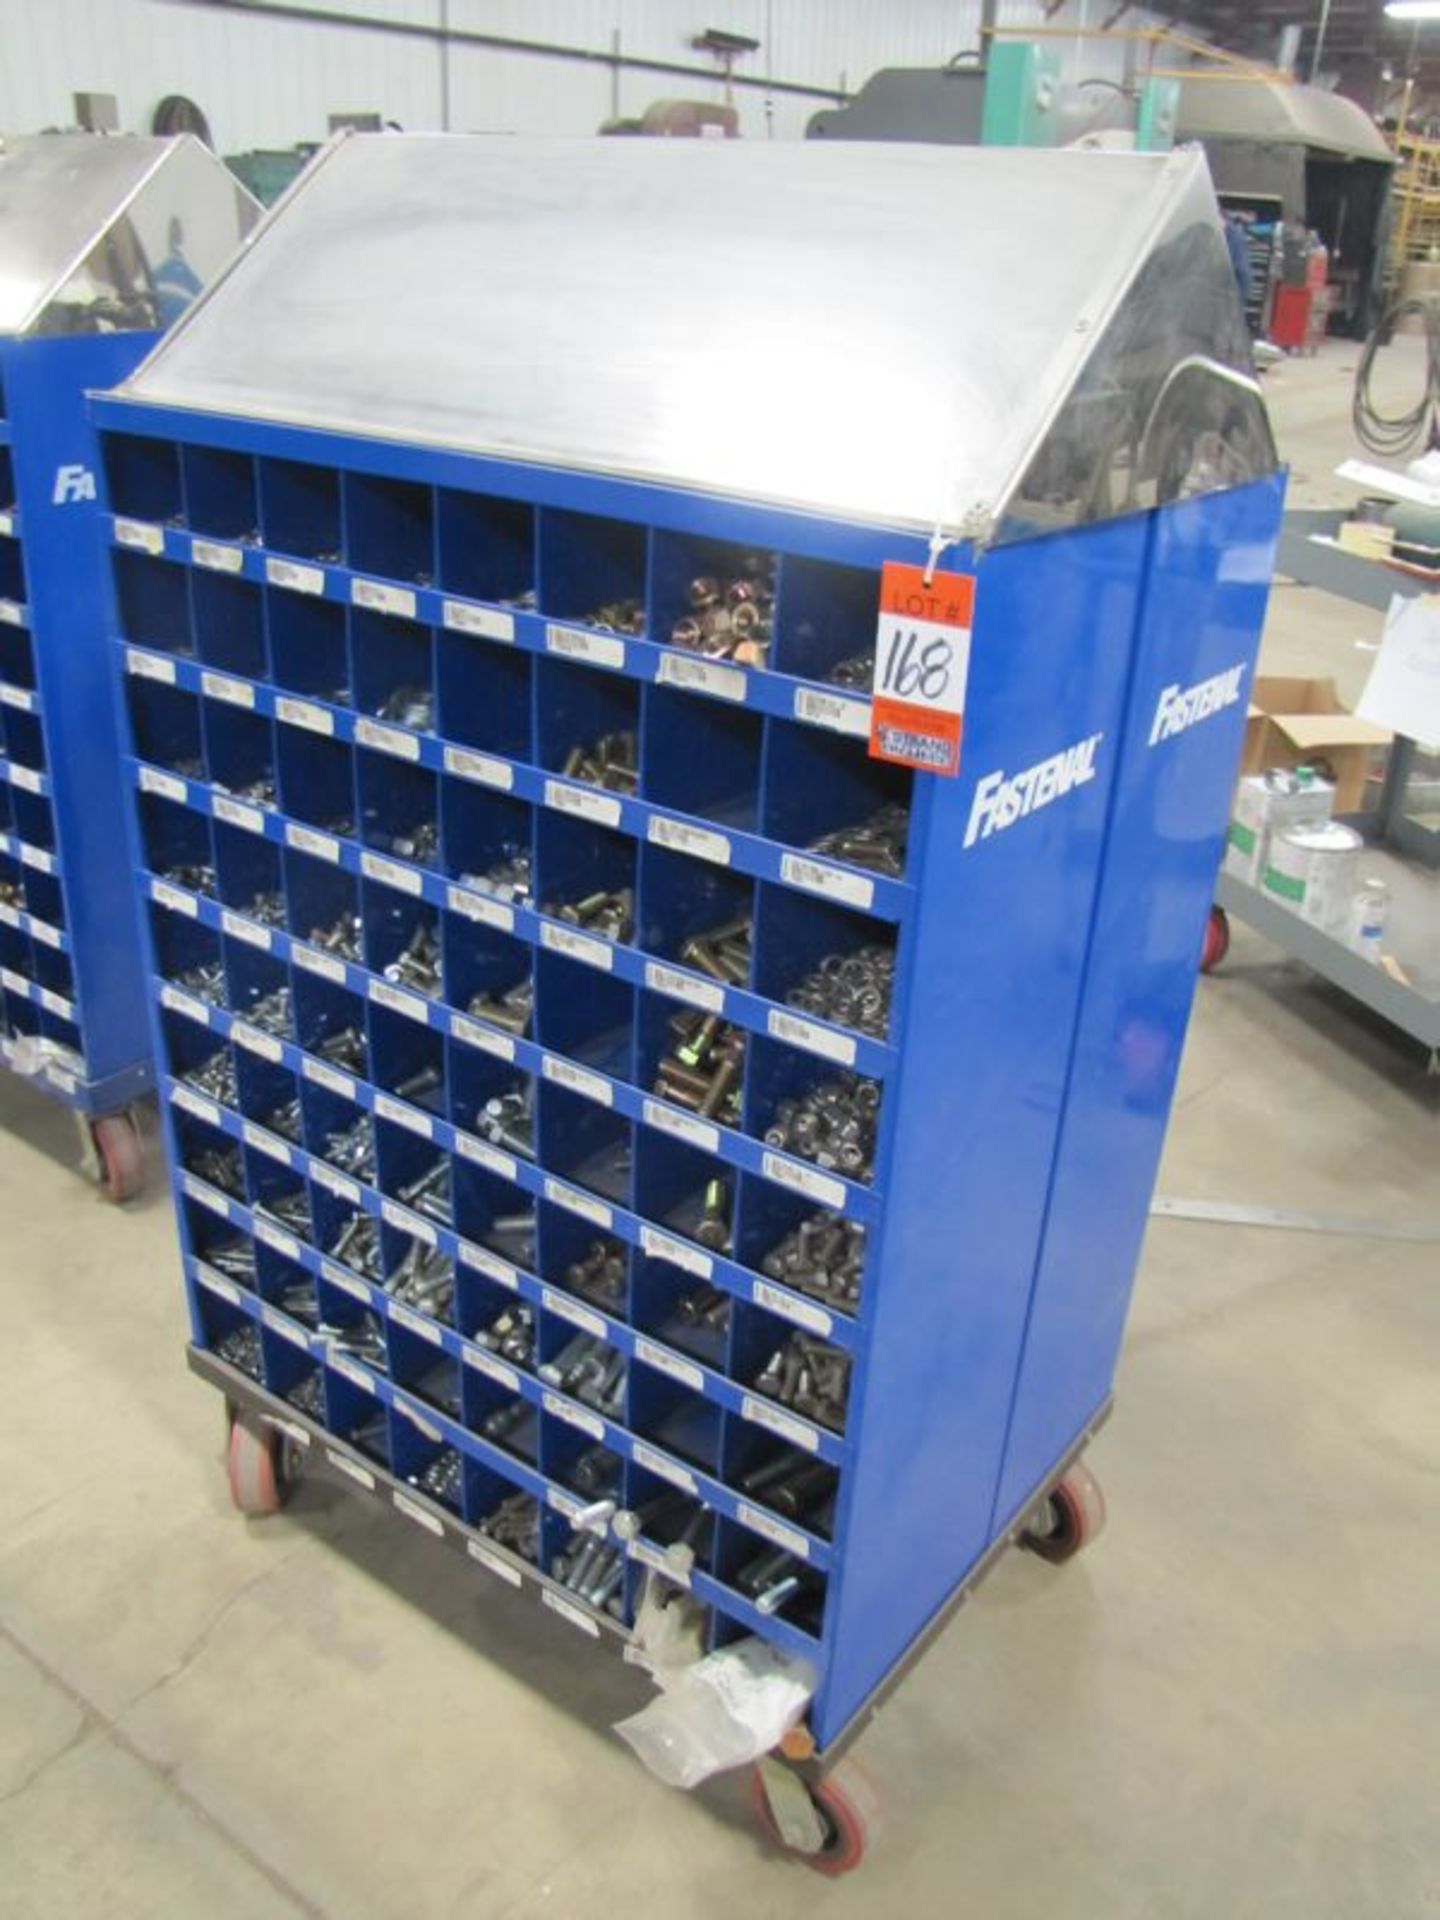 Fastenal Portable Rolling Bin with Split Washers, Flat Washers, Nuts and Bolts as Shown